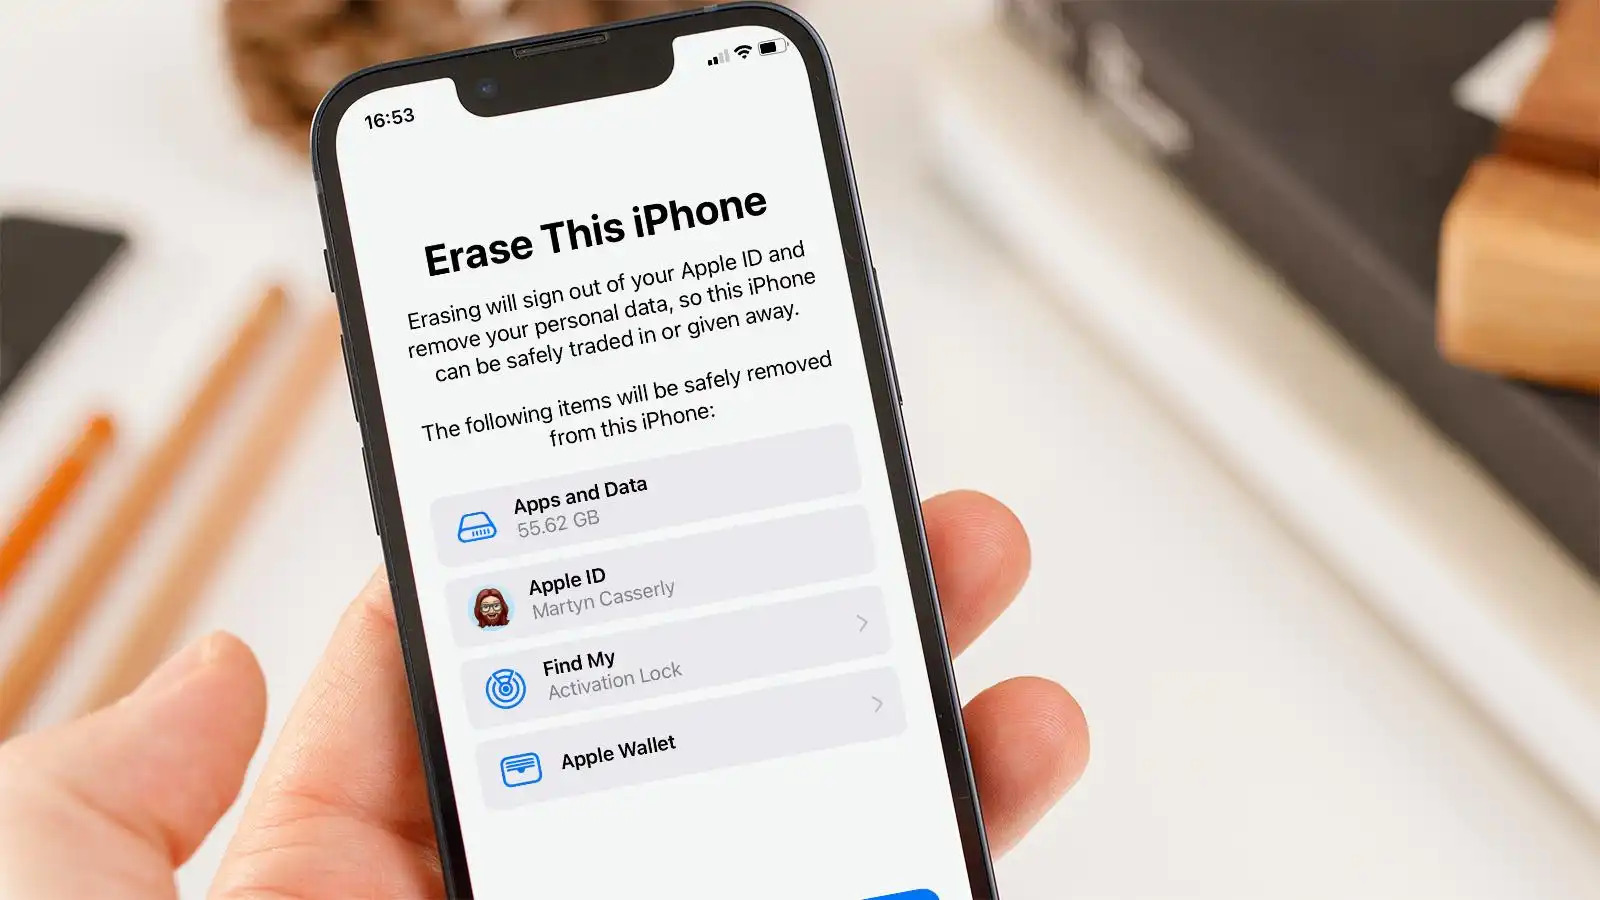 how-to-reset-your-iphone-restart-or-fully-wipe-your-data